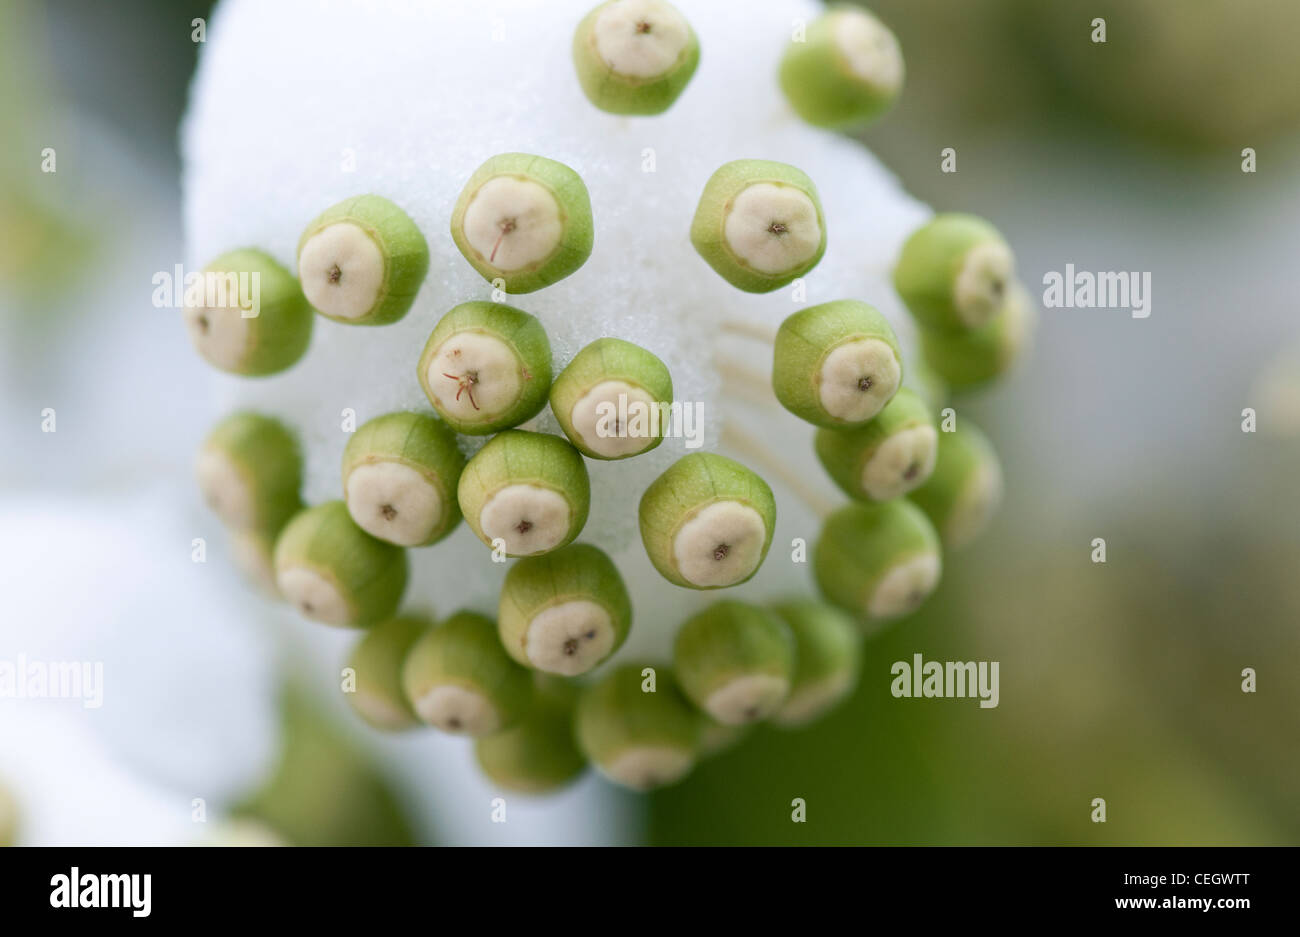 seed pods on caster oil plant Stock Photo